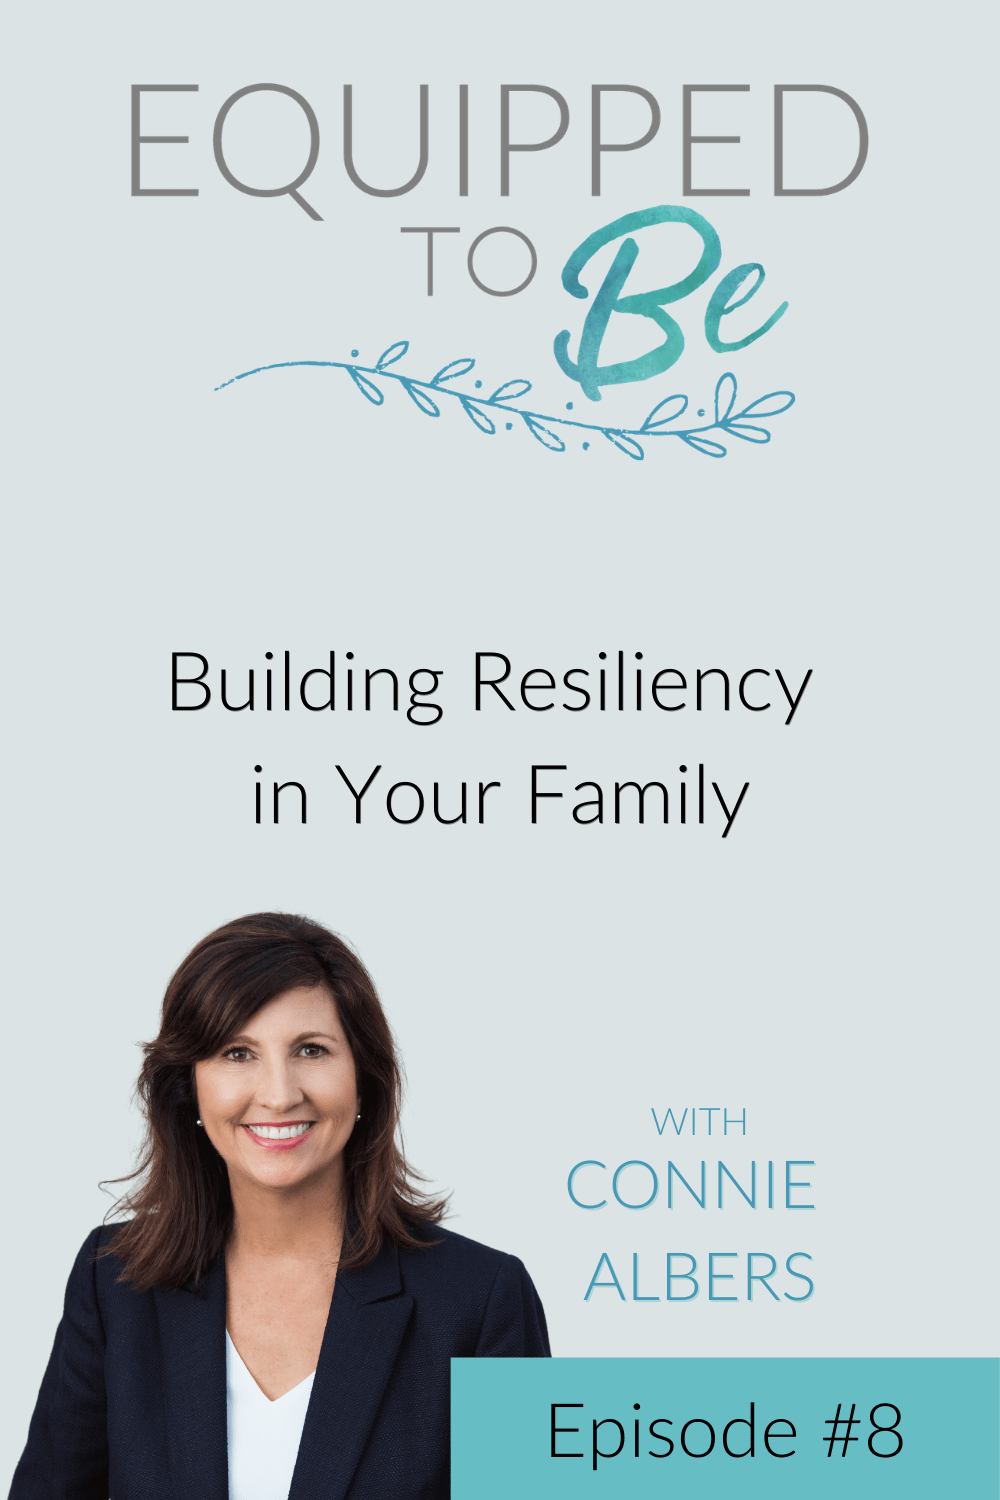 Building Resiliency in Your Family - ETB #8